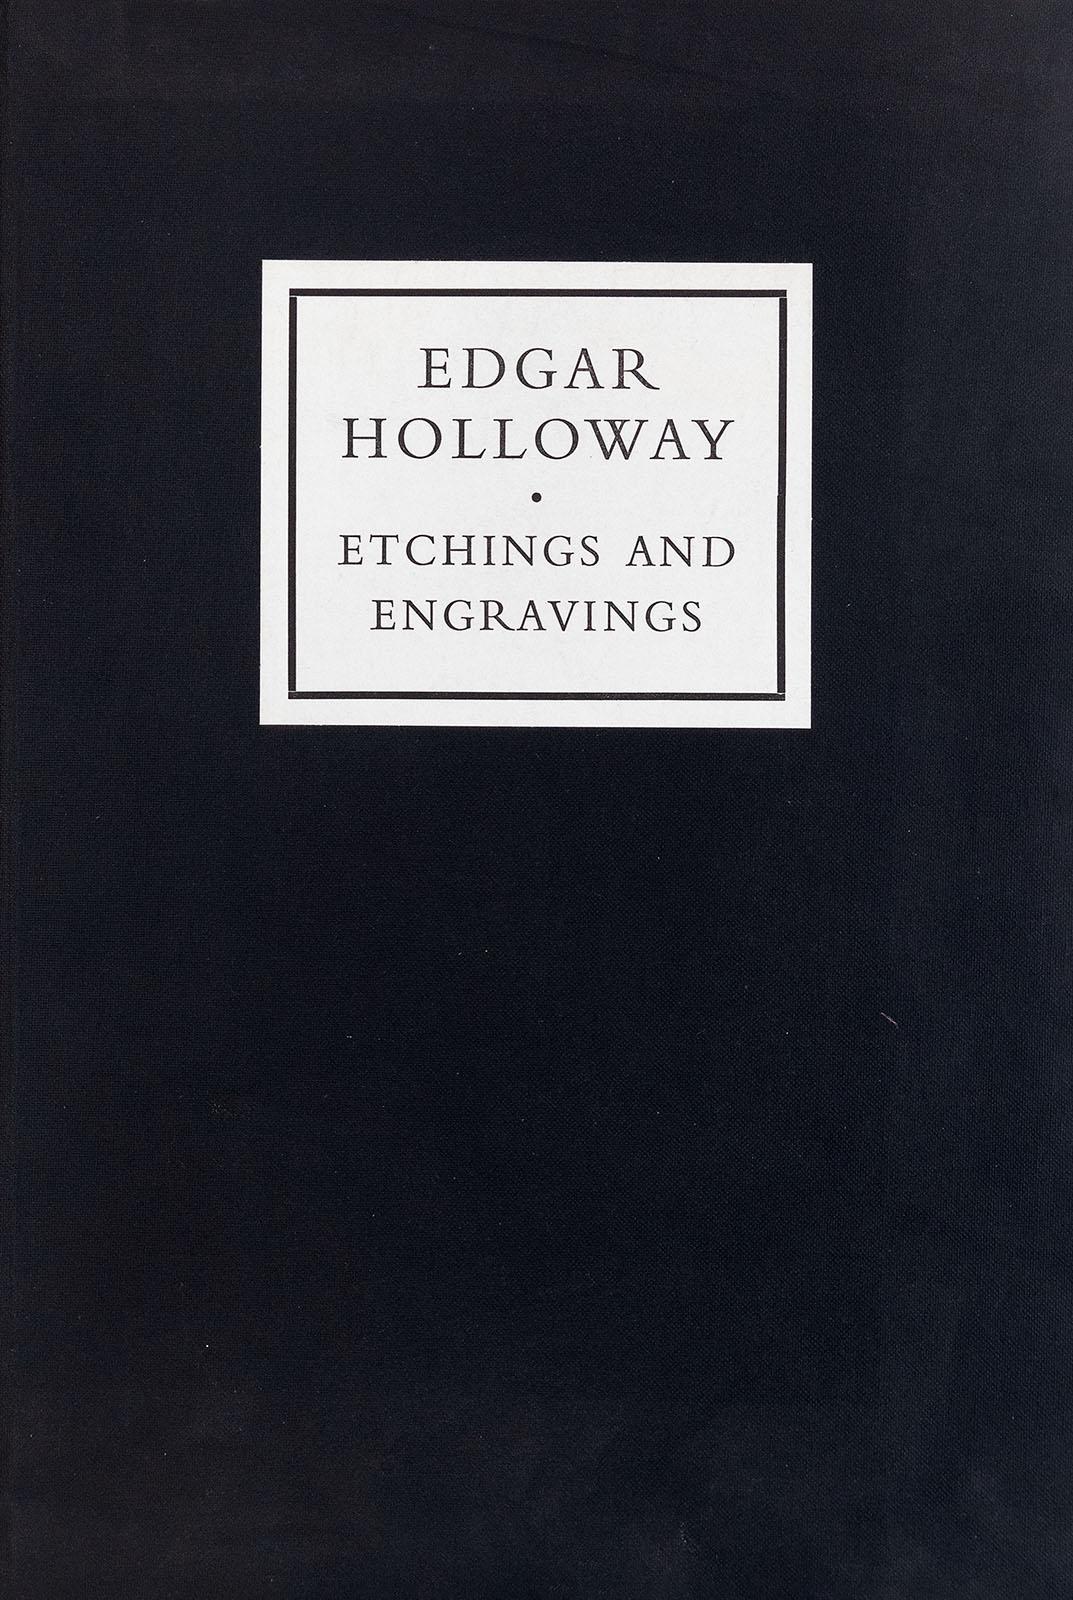 Folio of 6 etchings and engravings - Print by Edgar A. Holloway